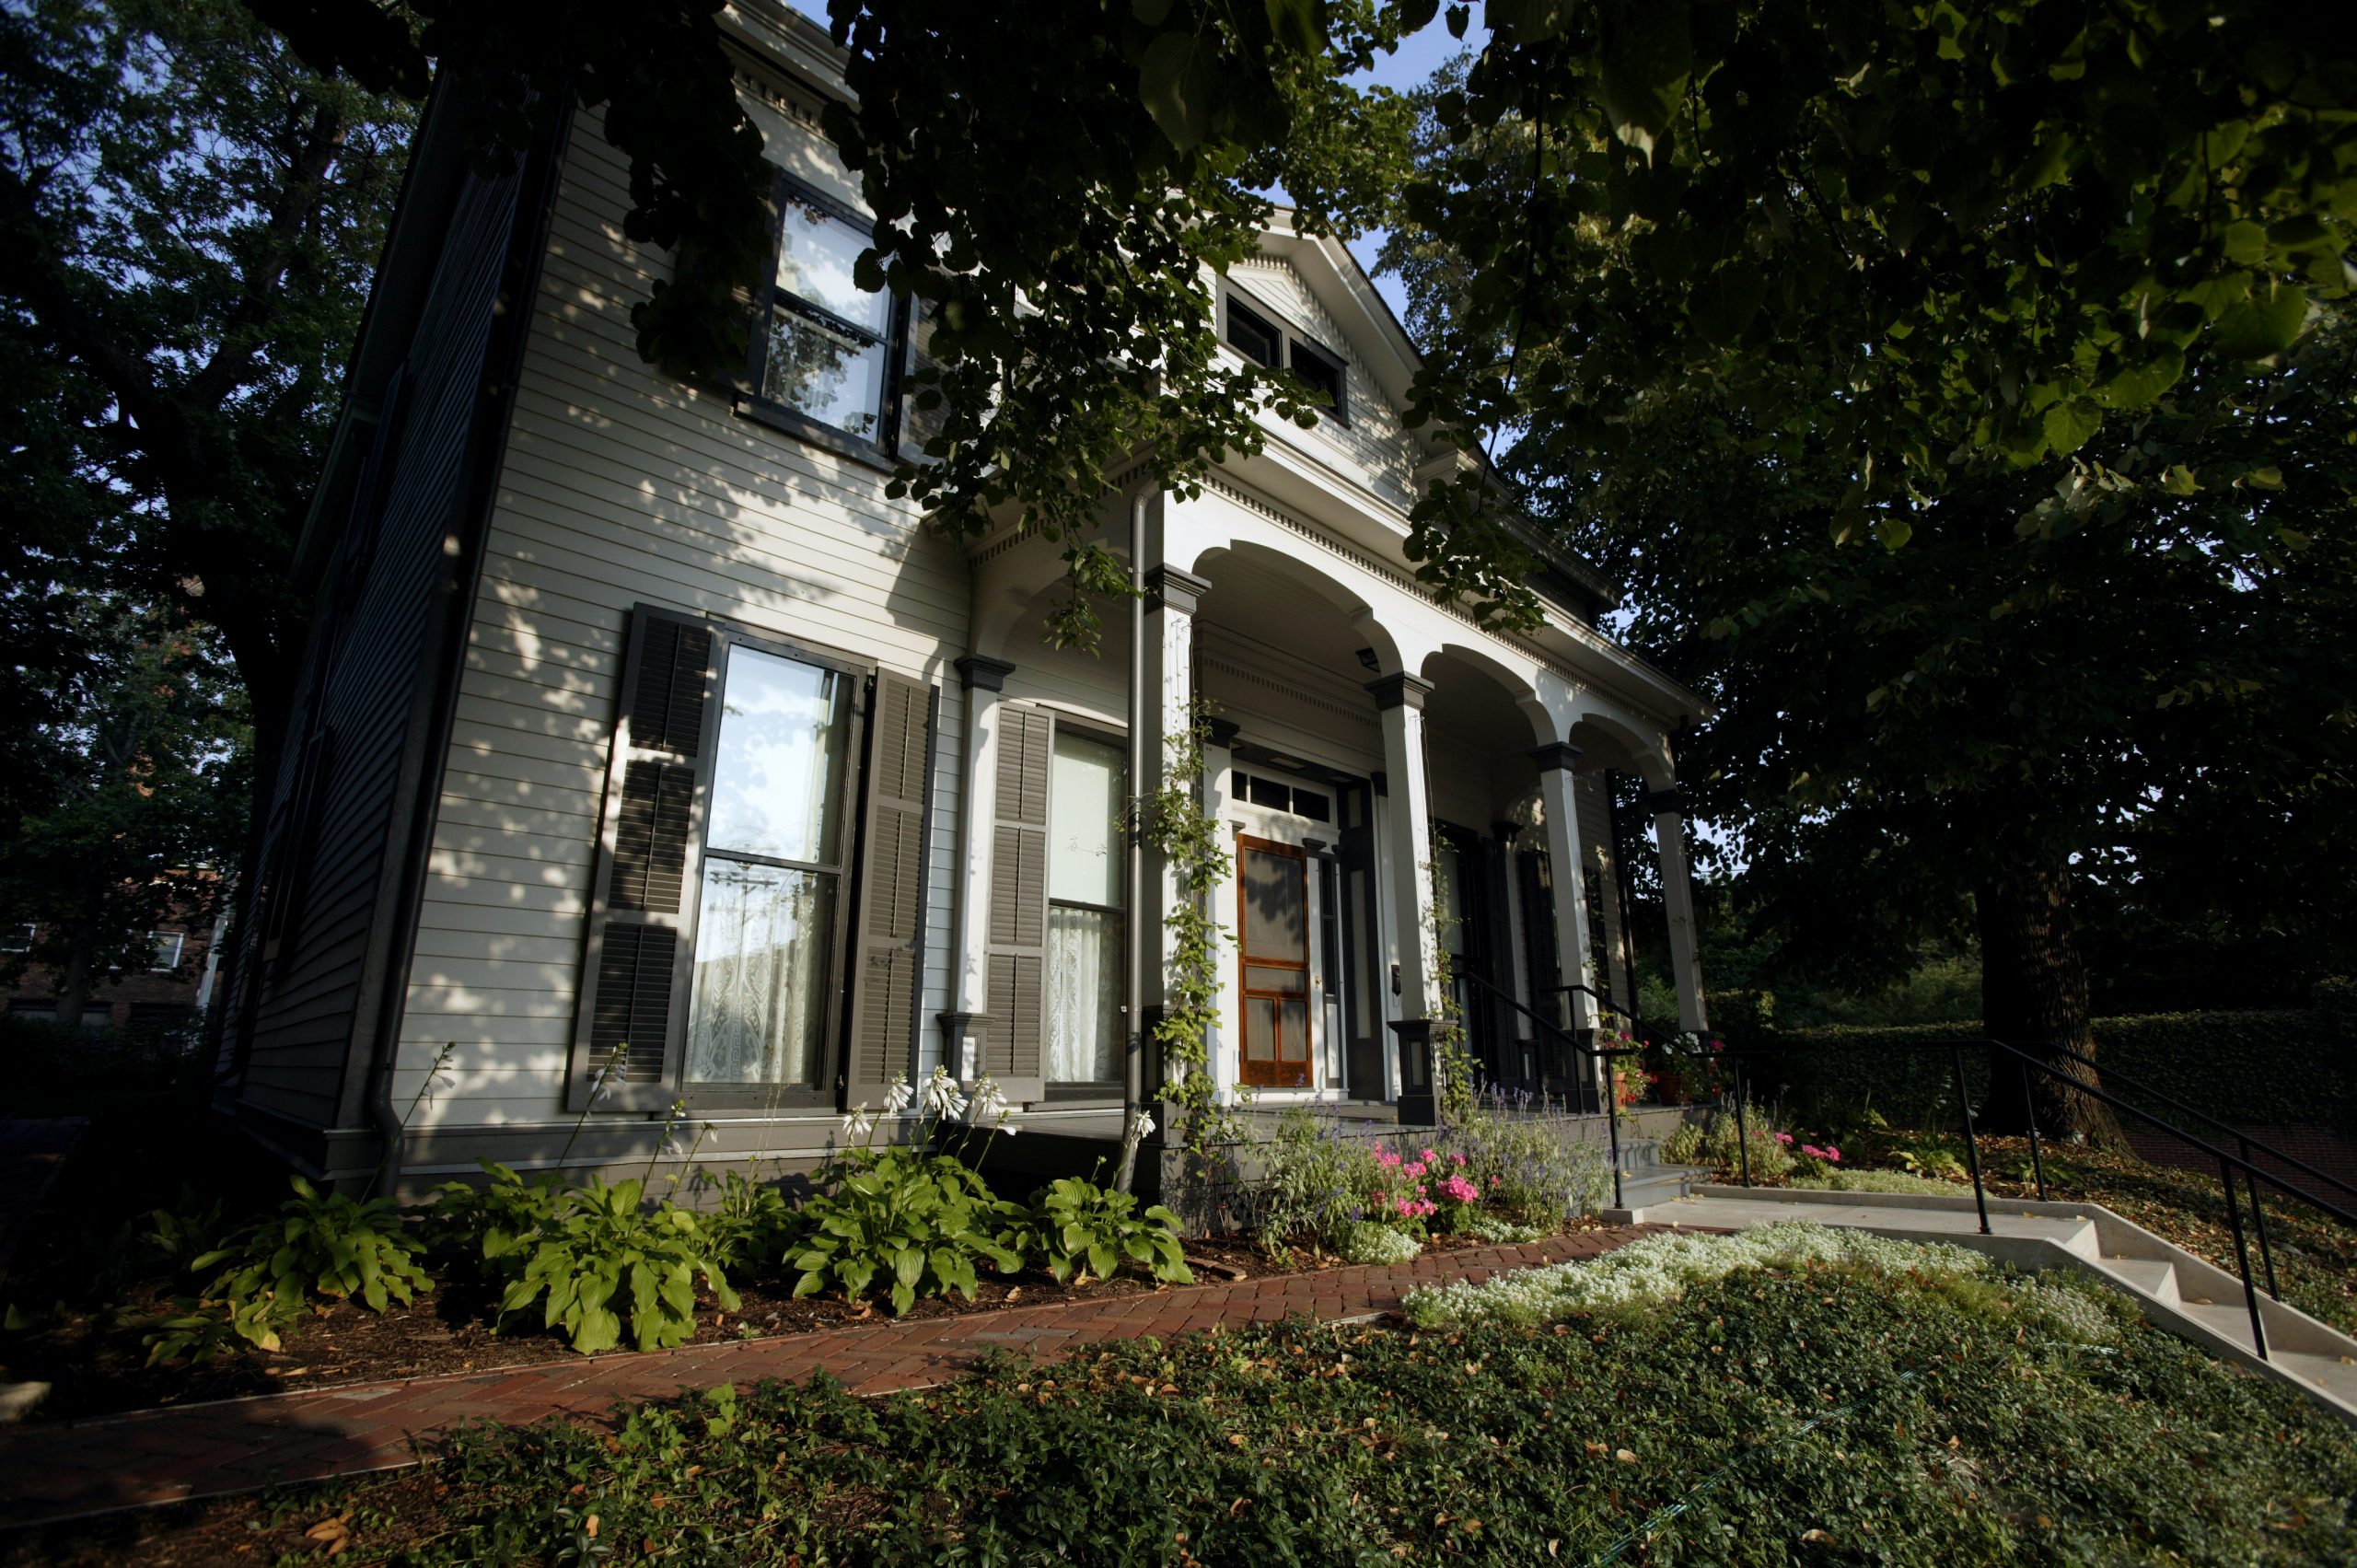 The Vachel Lindsay Home State Historic Site